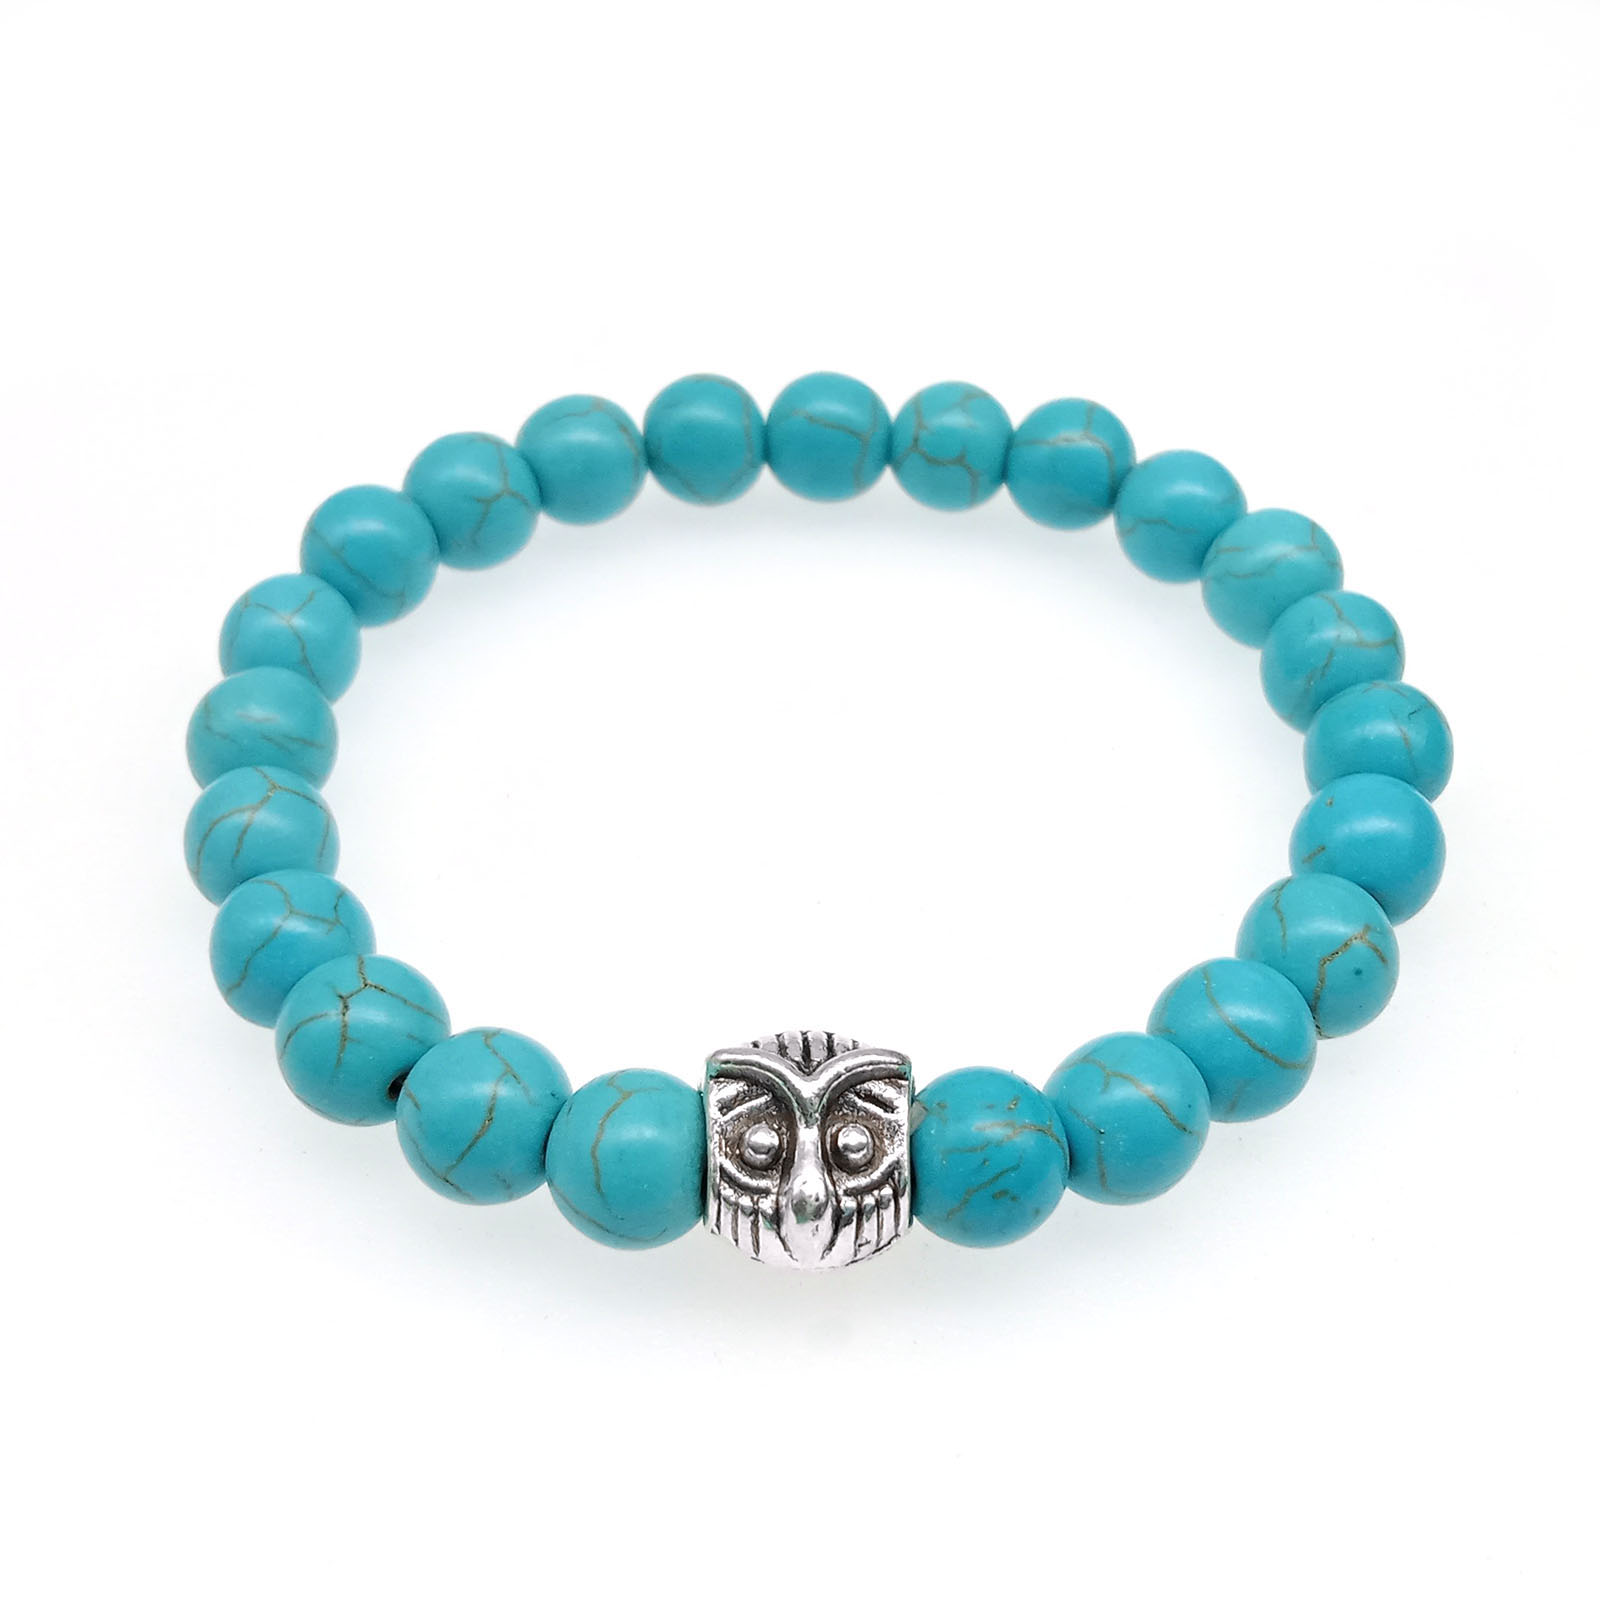 Made of 23 8mm turquoise beads and an alloy accessory